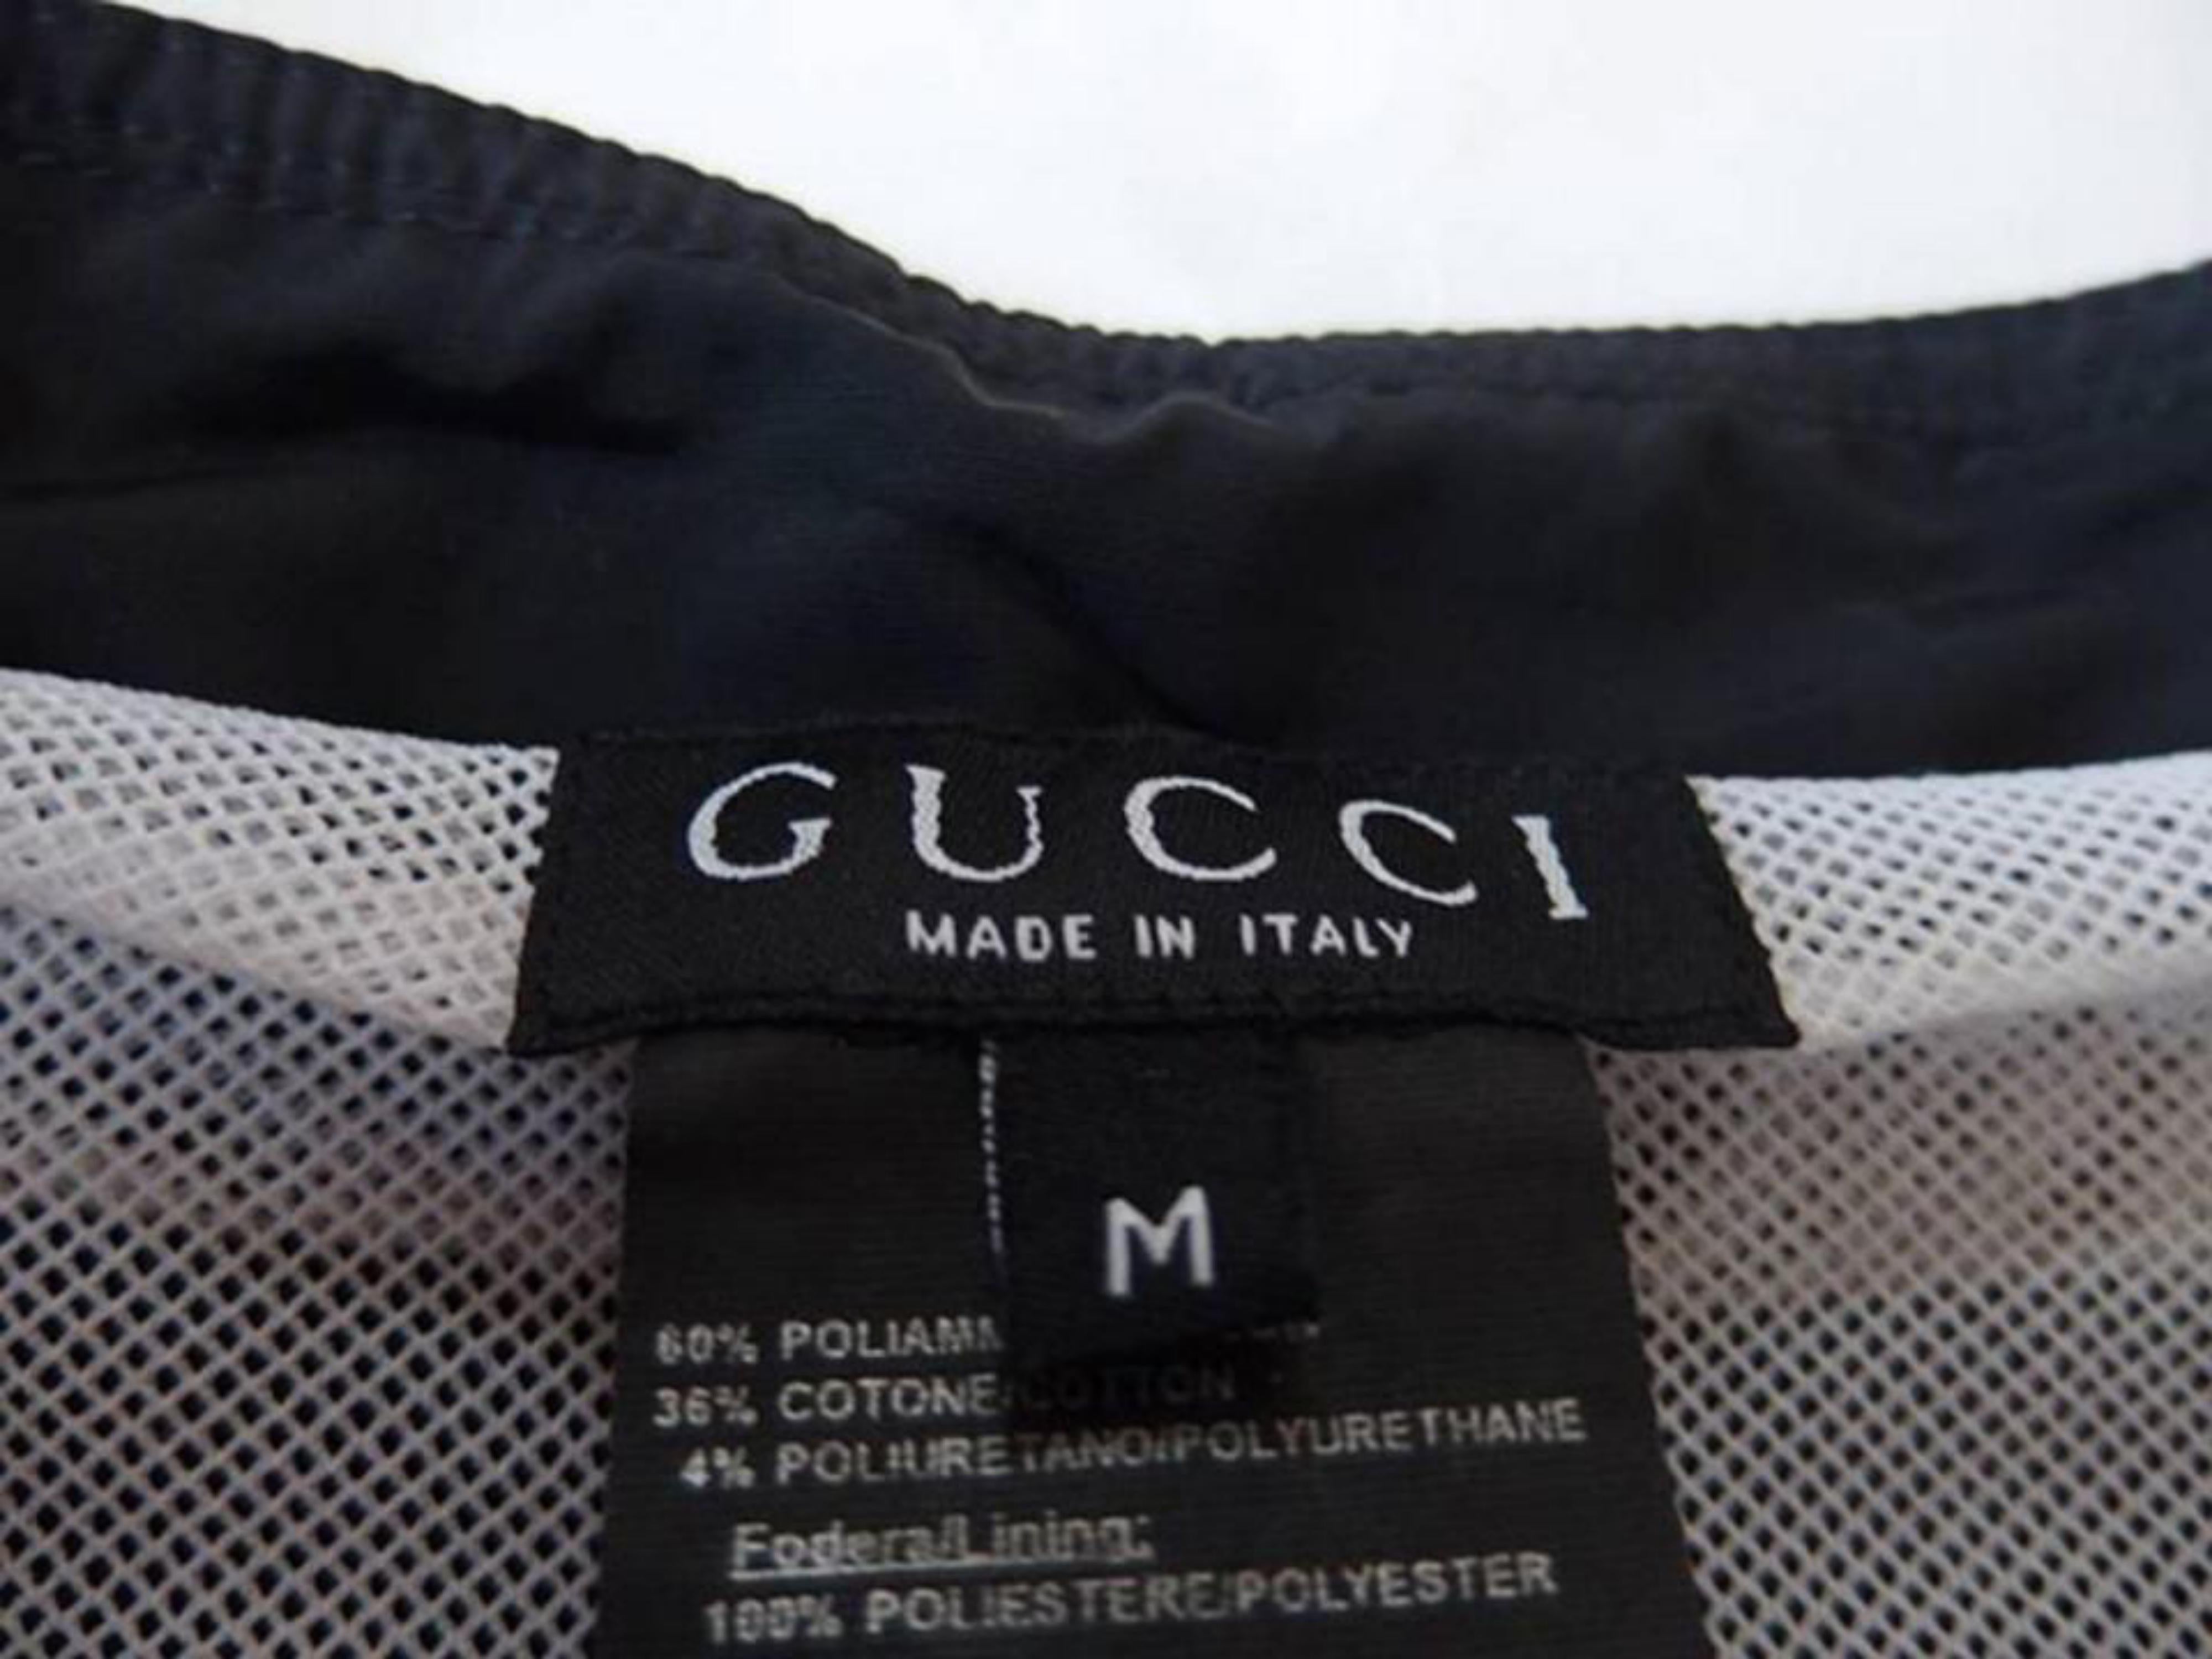 Made In: Italy
OVERALL EXCELLENT CONDITION
( 9/10 or A )
Mens Medium or Womens Large
Waist: 16